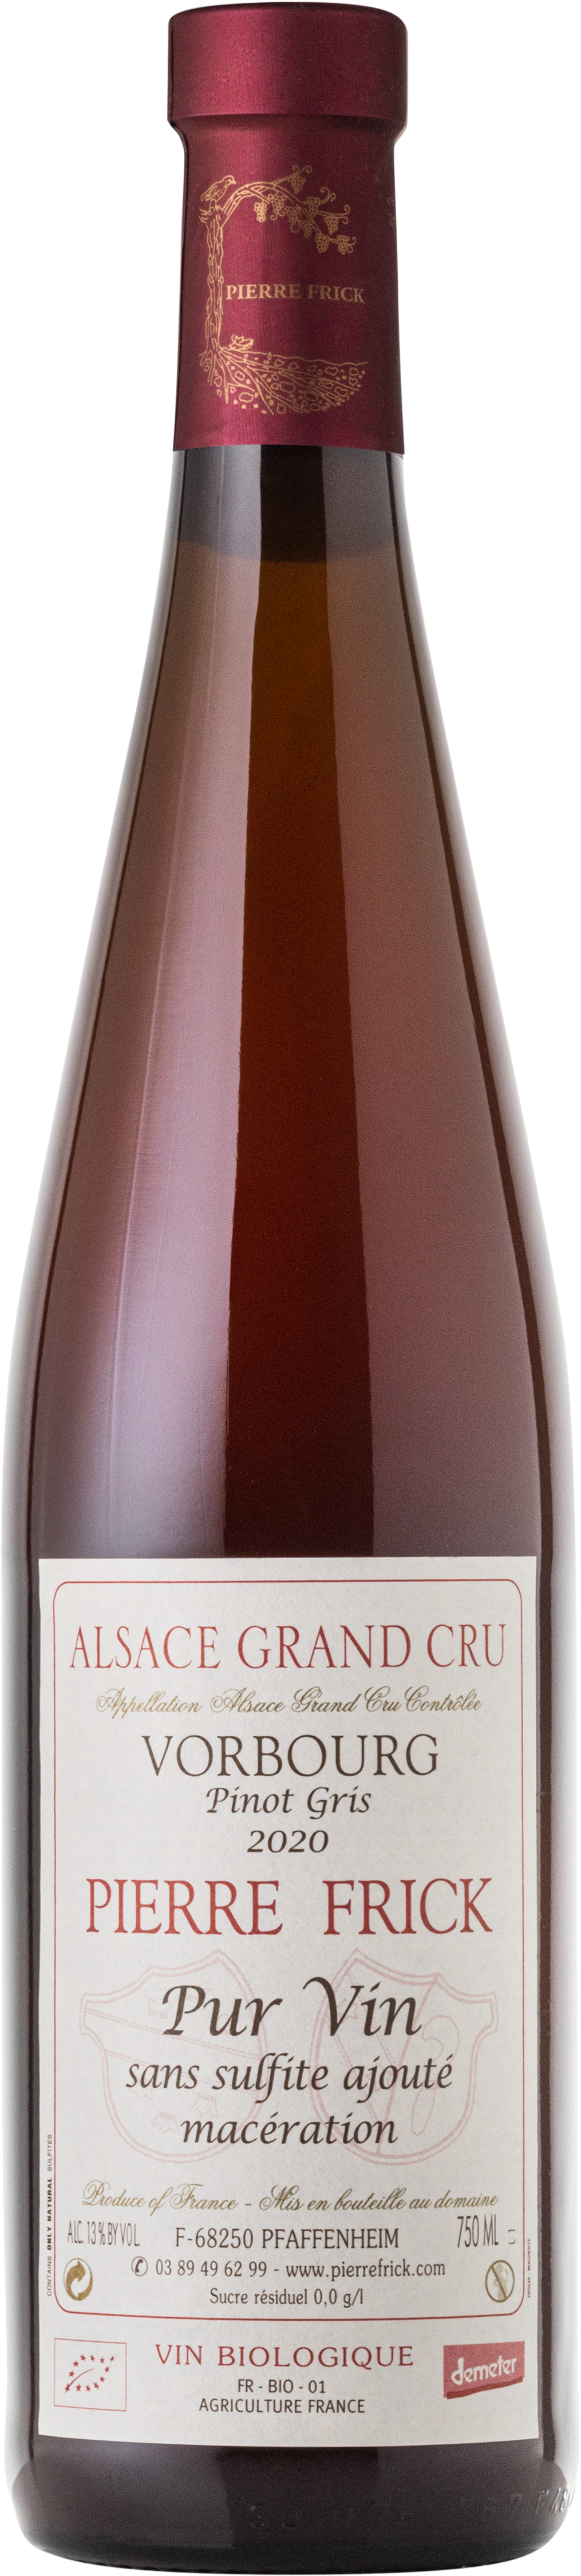 Vorbourg Pinot Gris